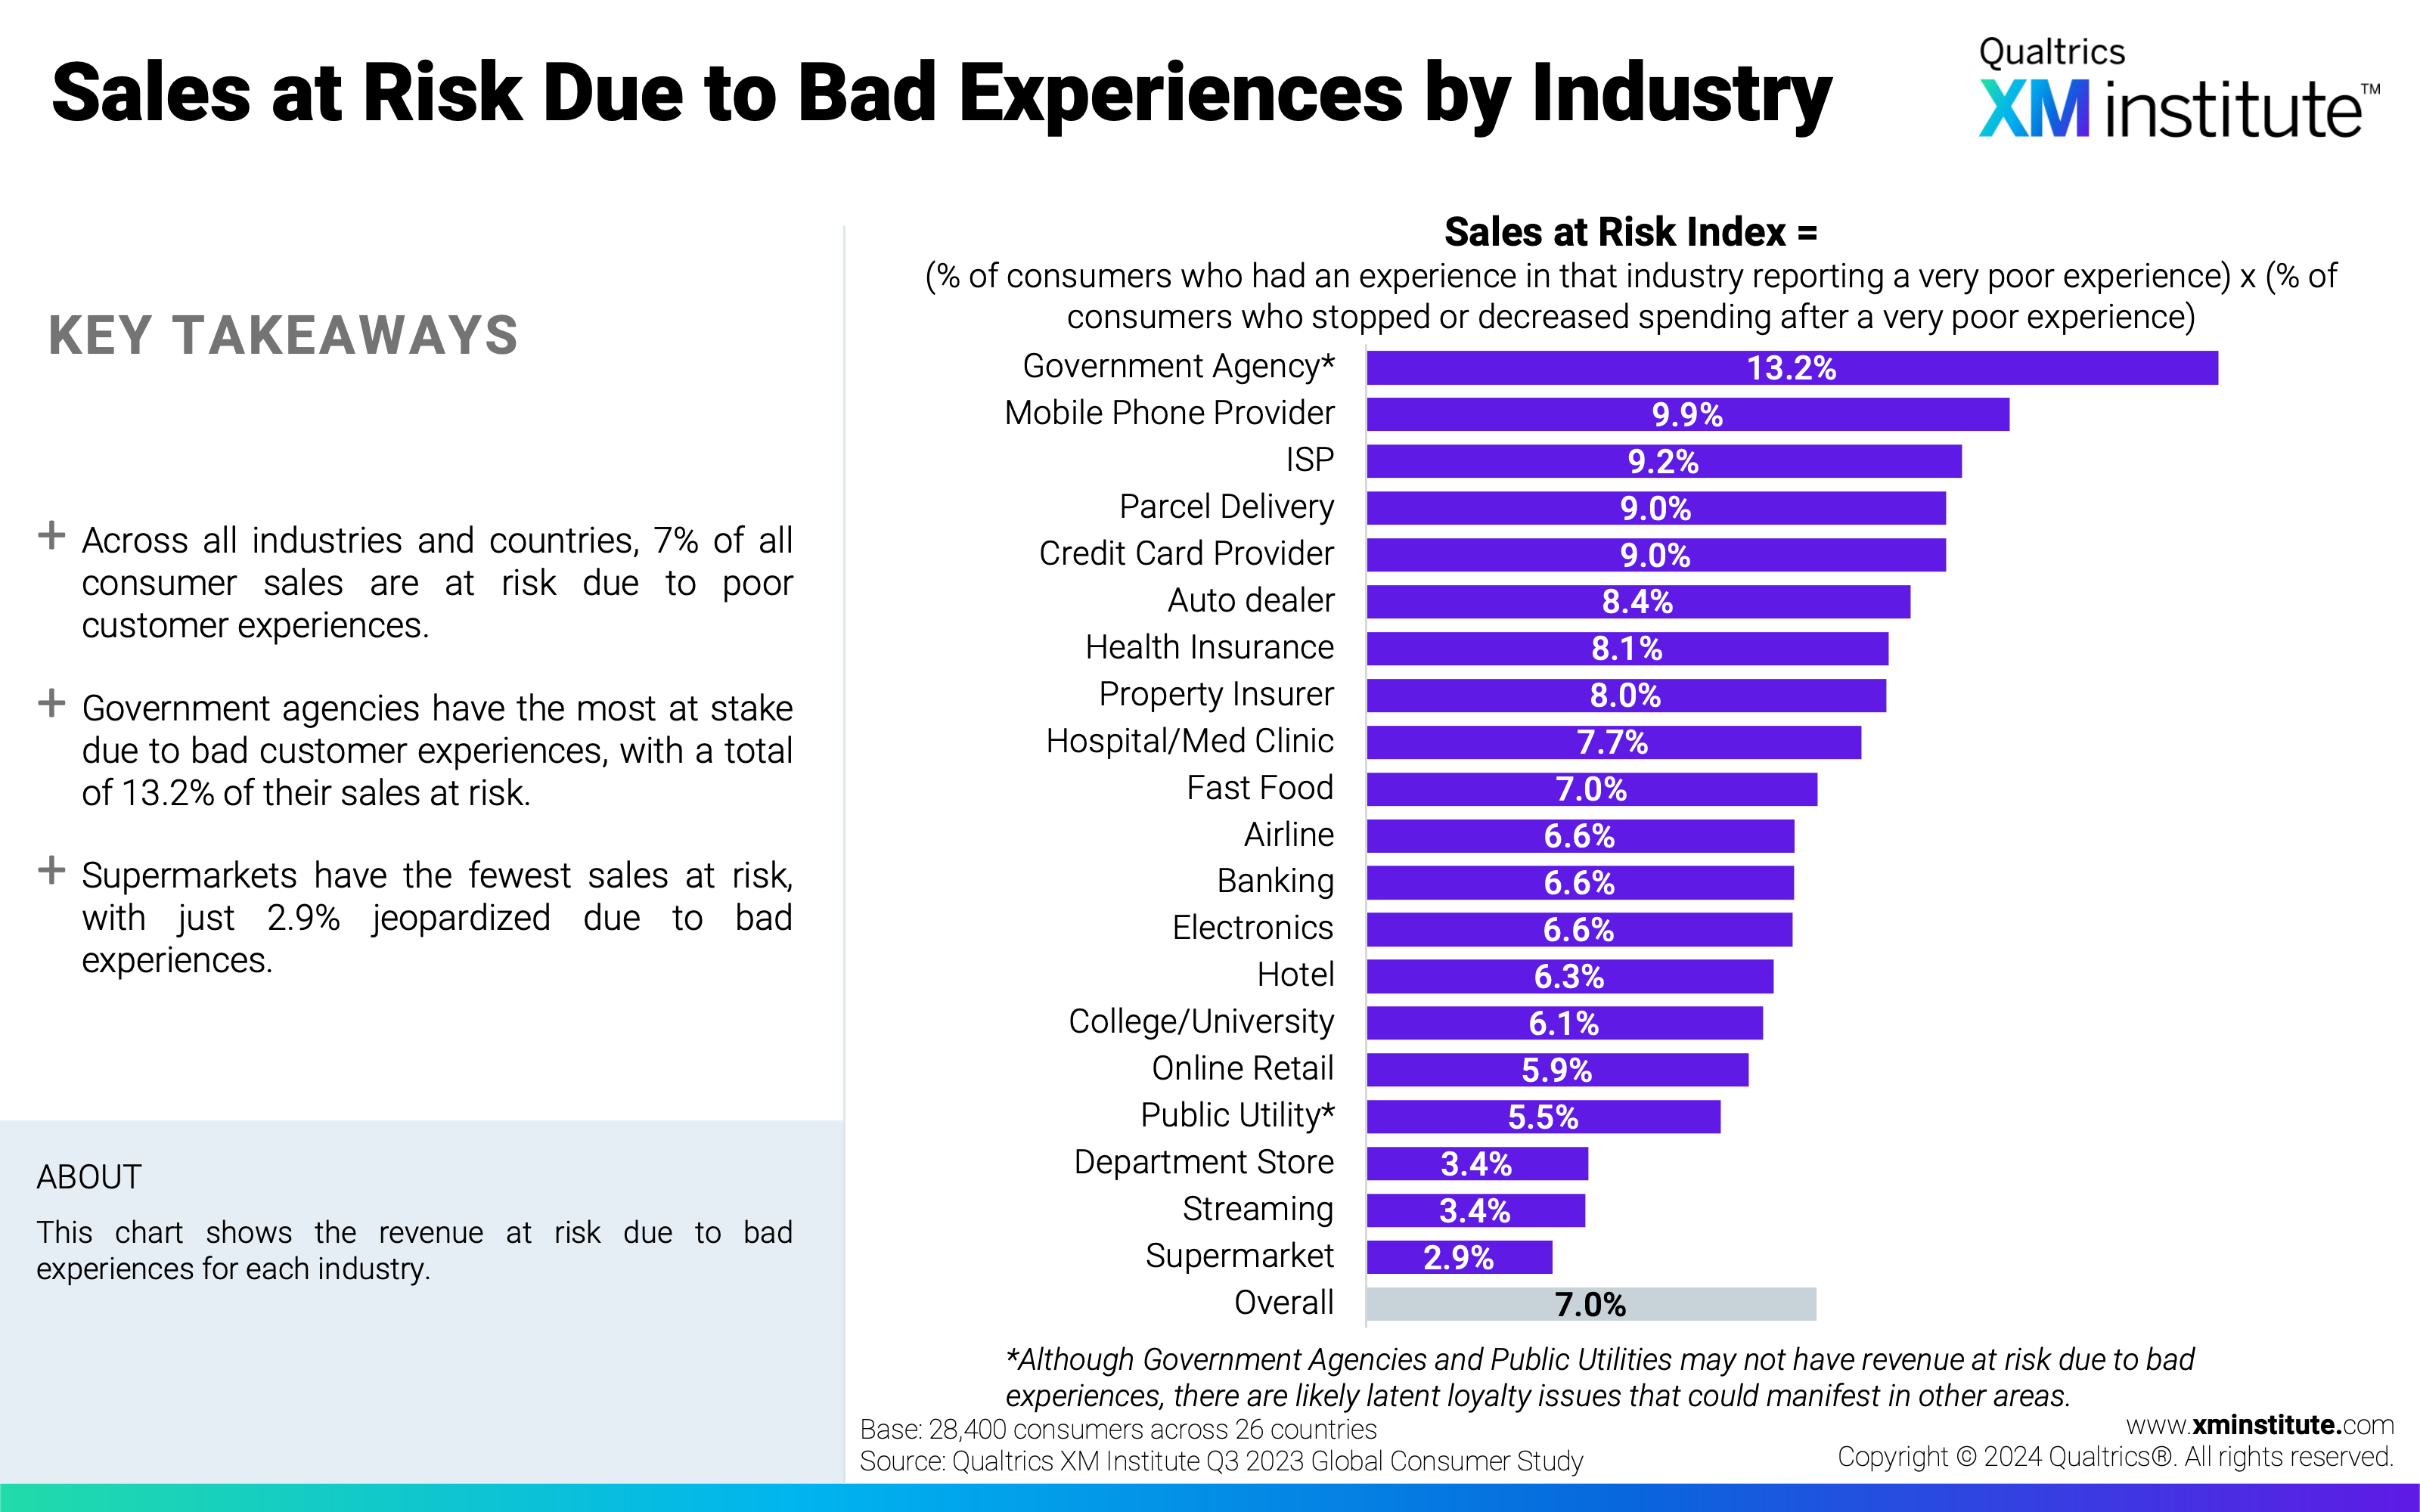 This chart shows the revenue at risk due to bad experiences for each industry. 